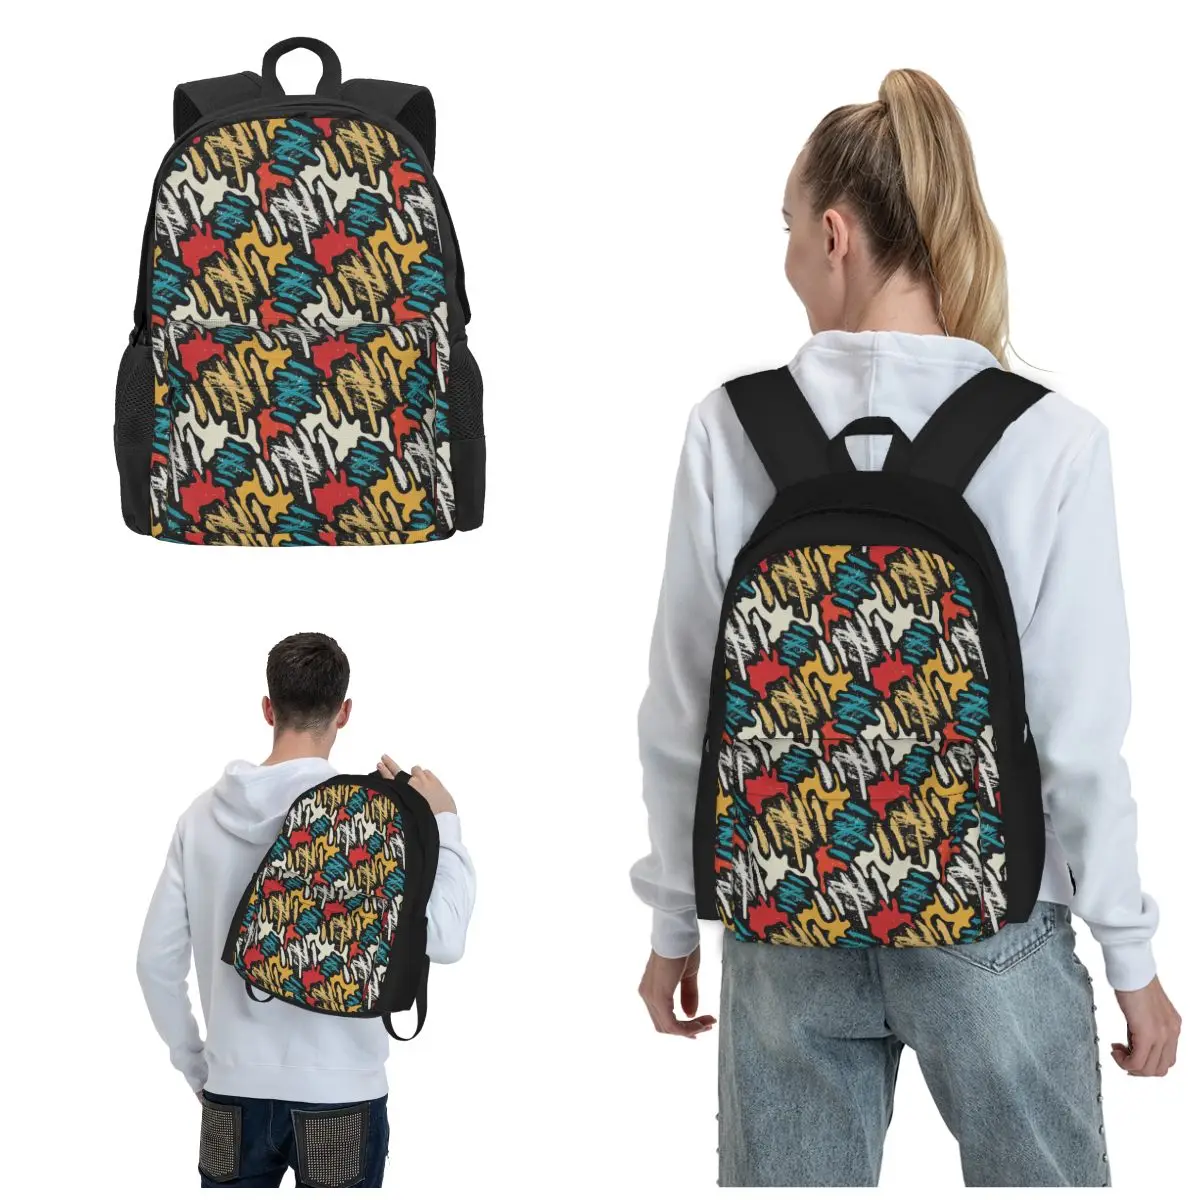 

Color Graffiti Backpacks Choose From Our Diverse Range Of Backpacks To Match Your Style Travel Sport Outdoor Storage Bag